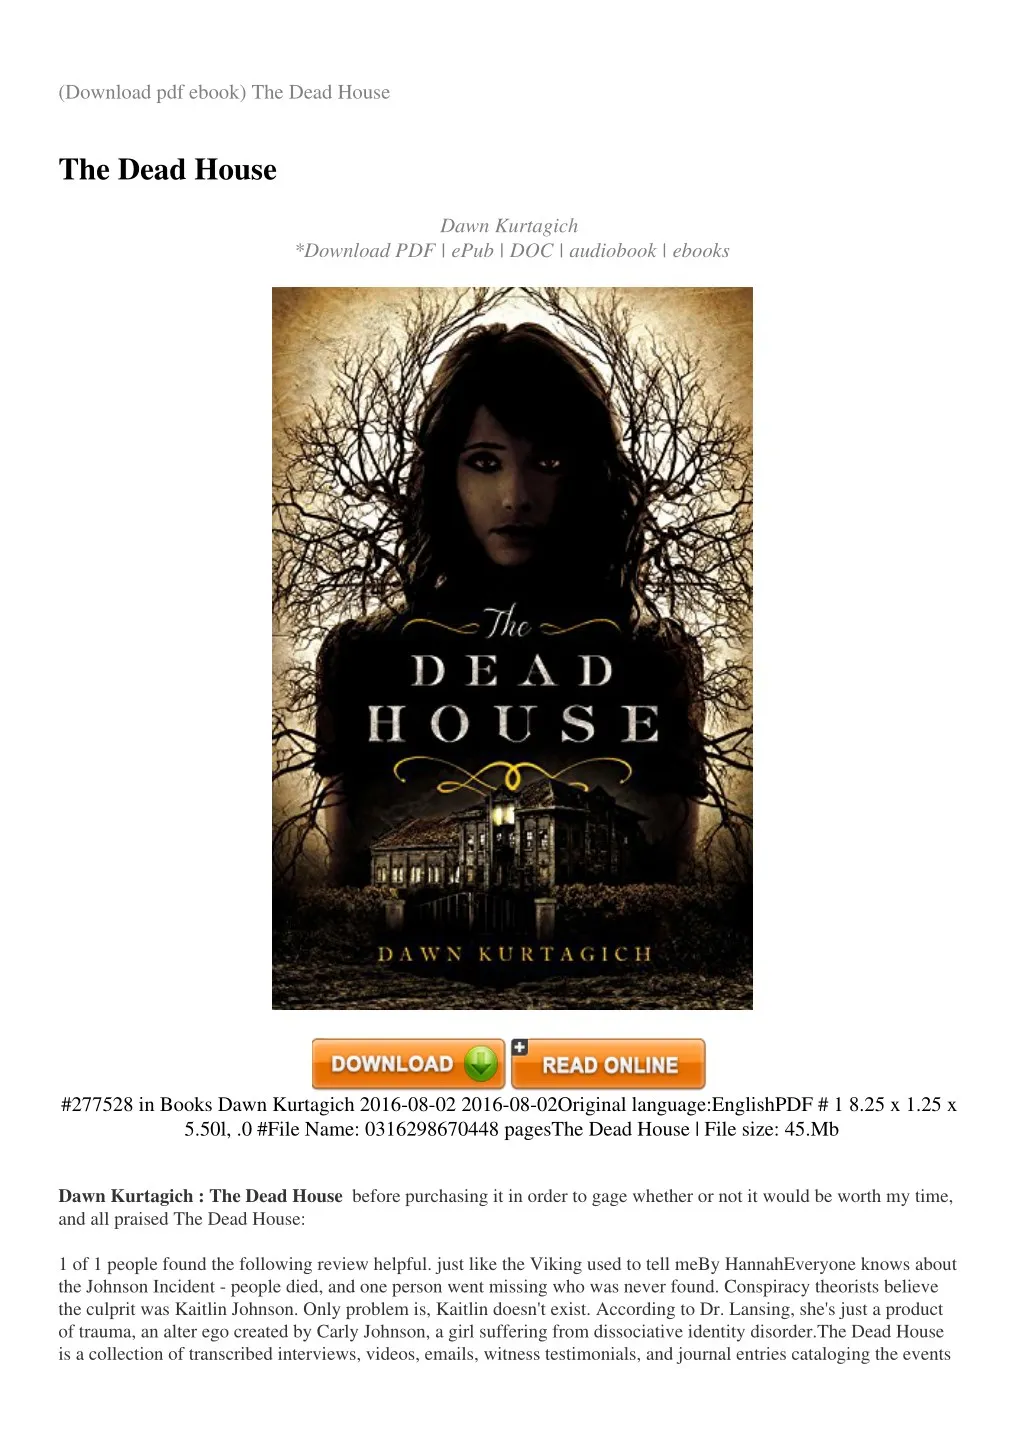 download pdf ebook the dead house